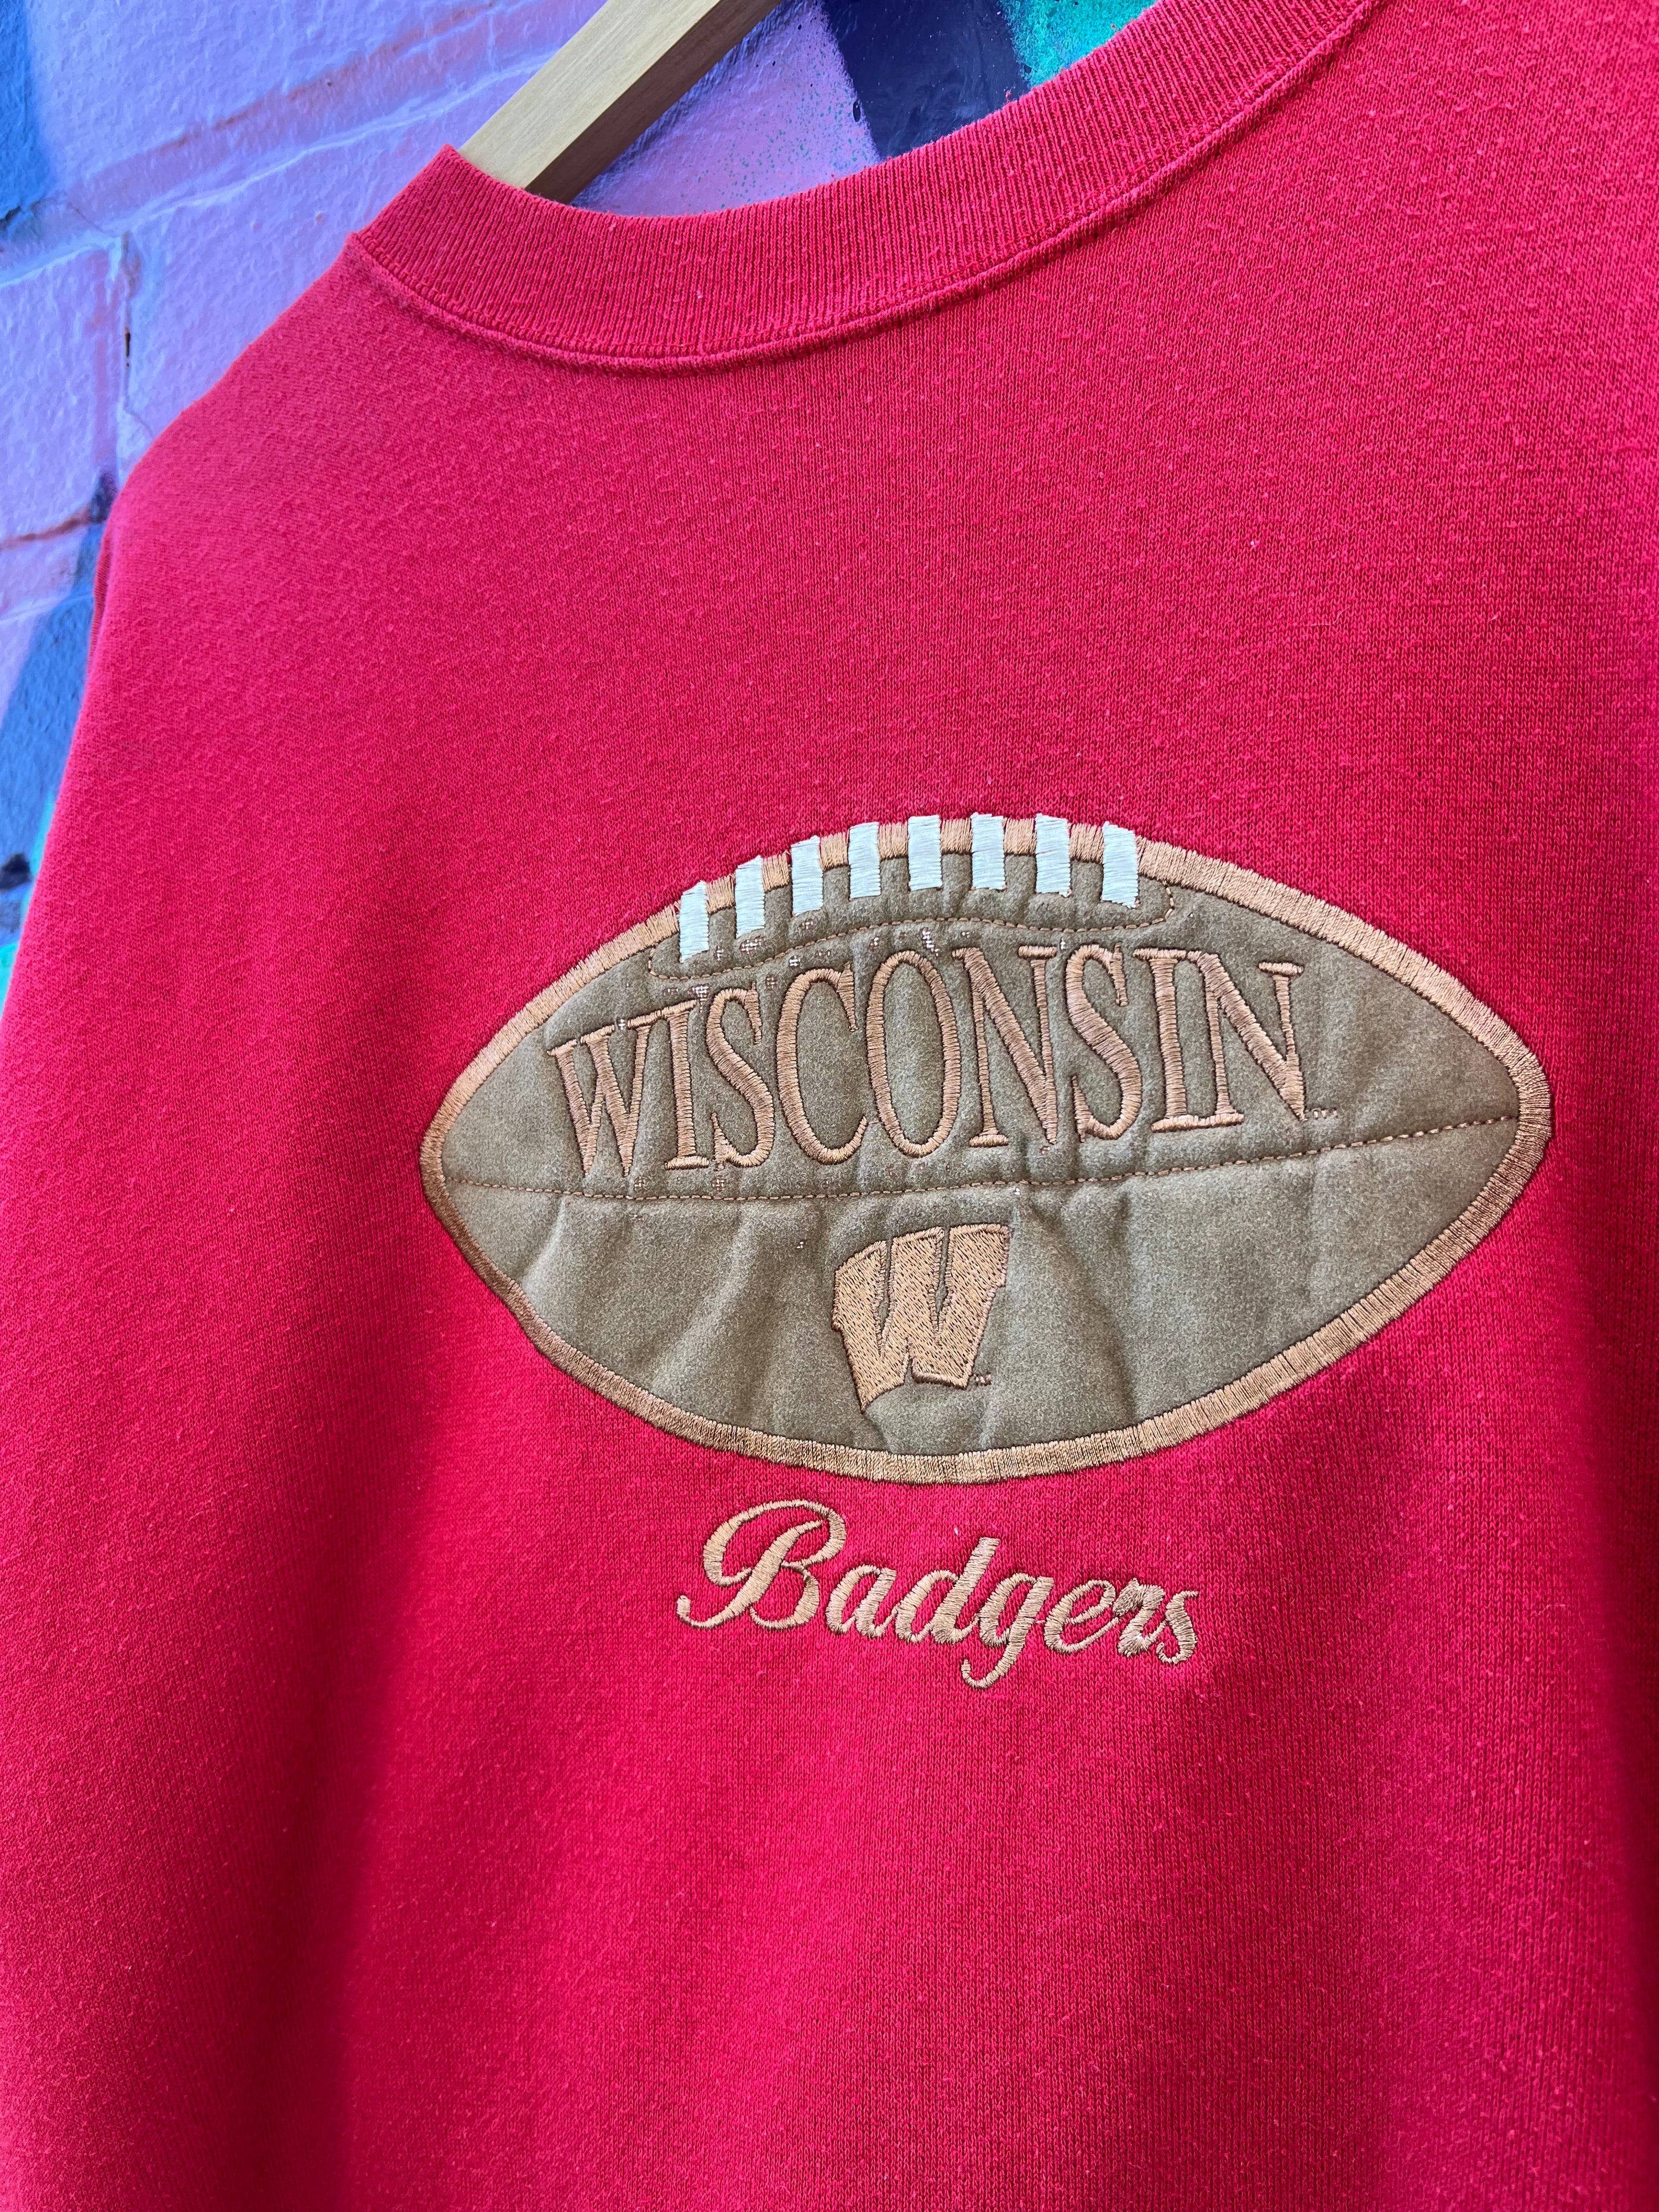 L - Embroidered Wisconsin Badgers Red Jumper